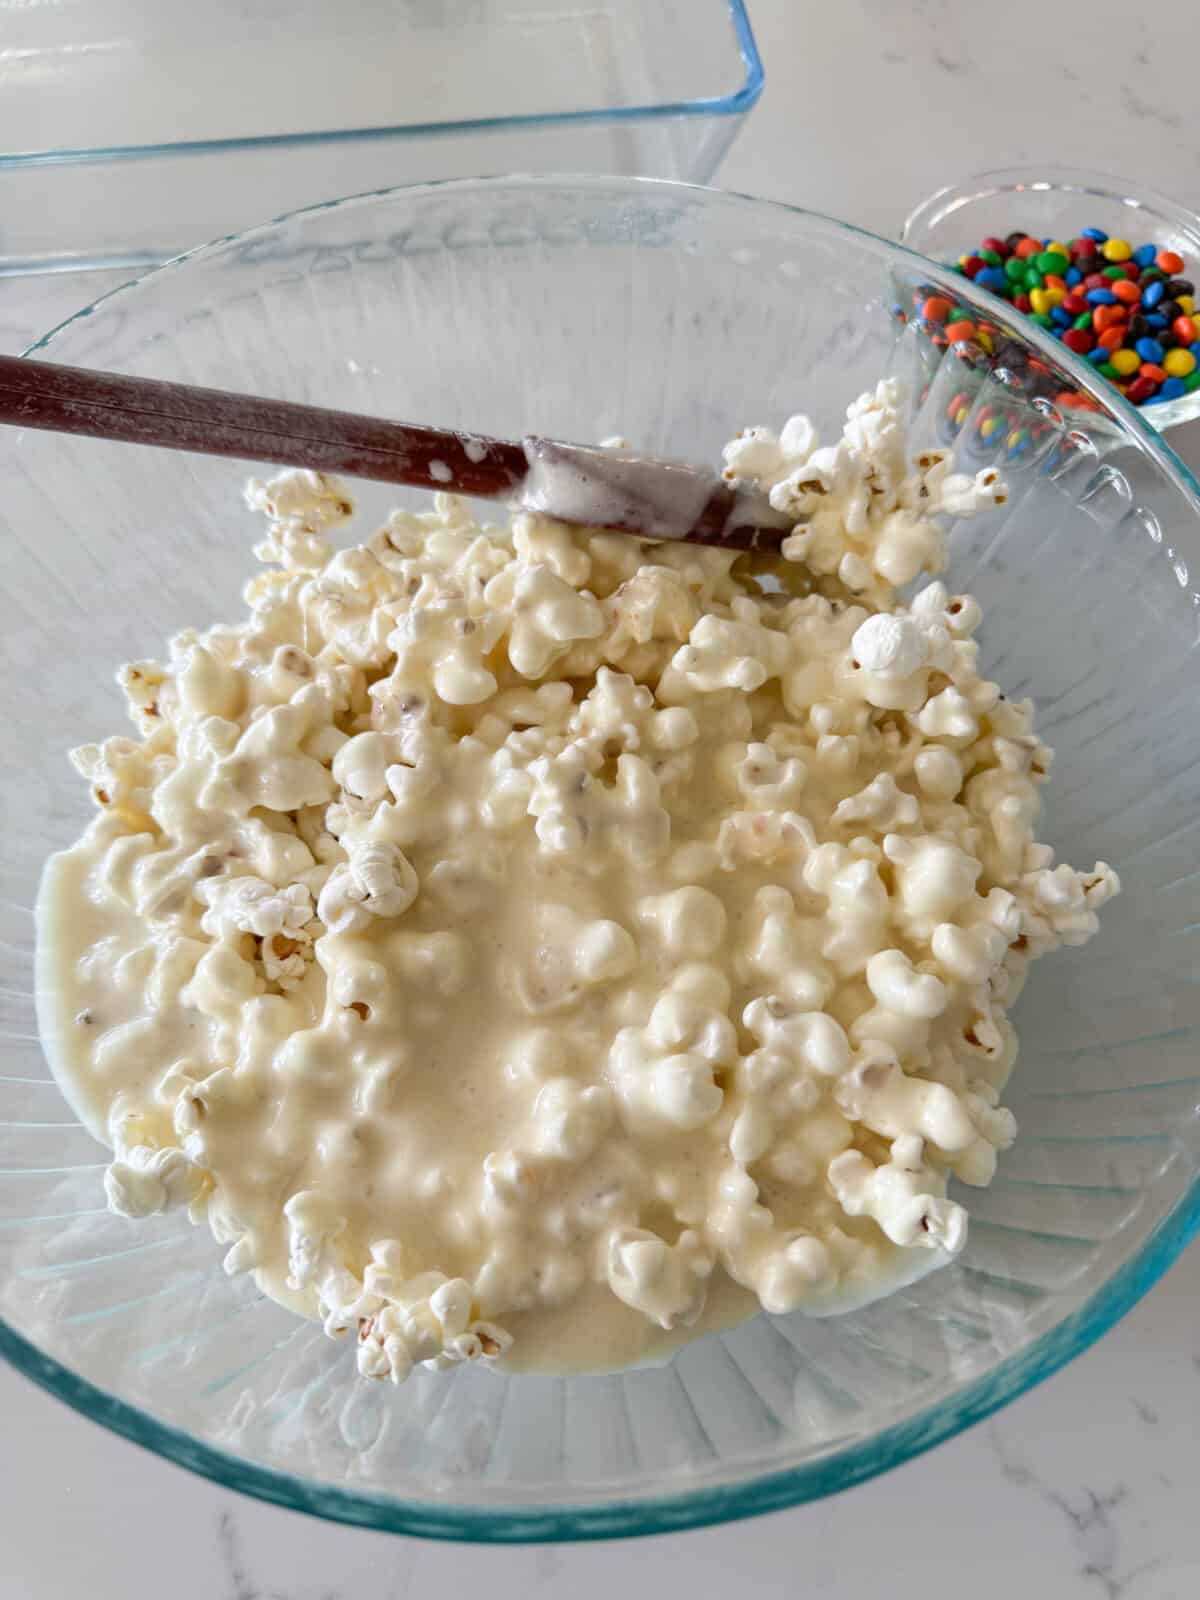 melted marshmallows added to bowl of popcorn and cereal